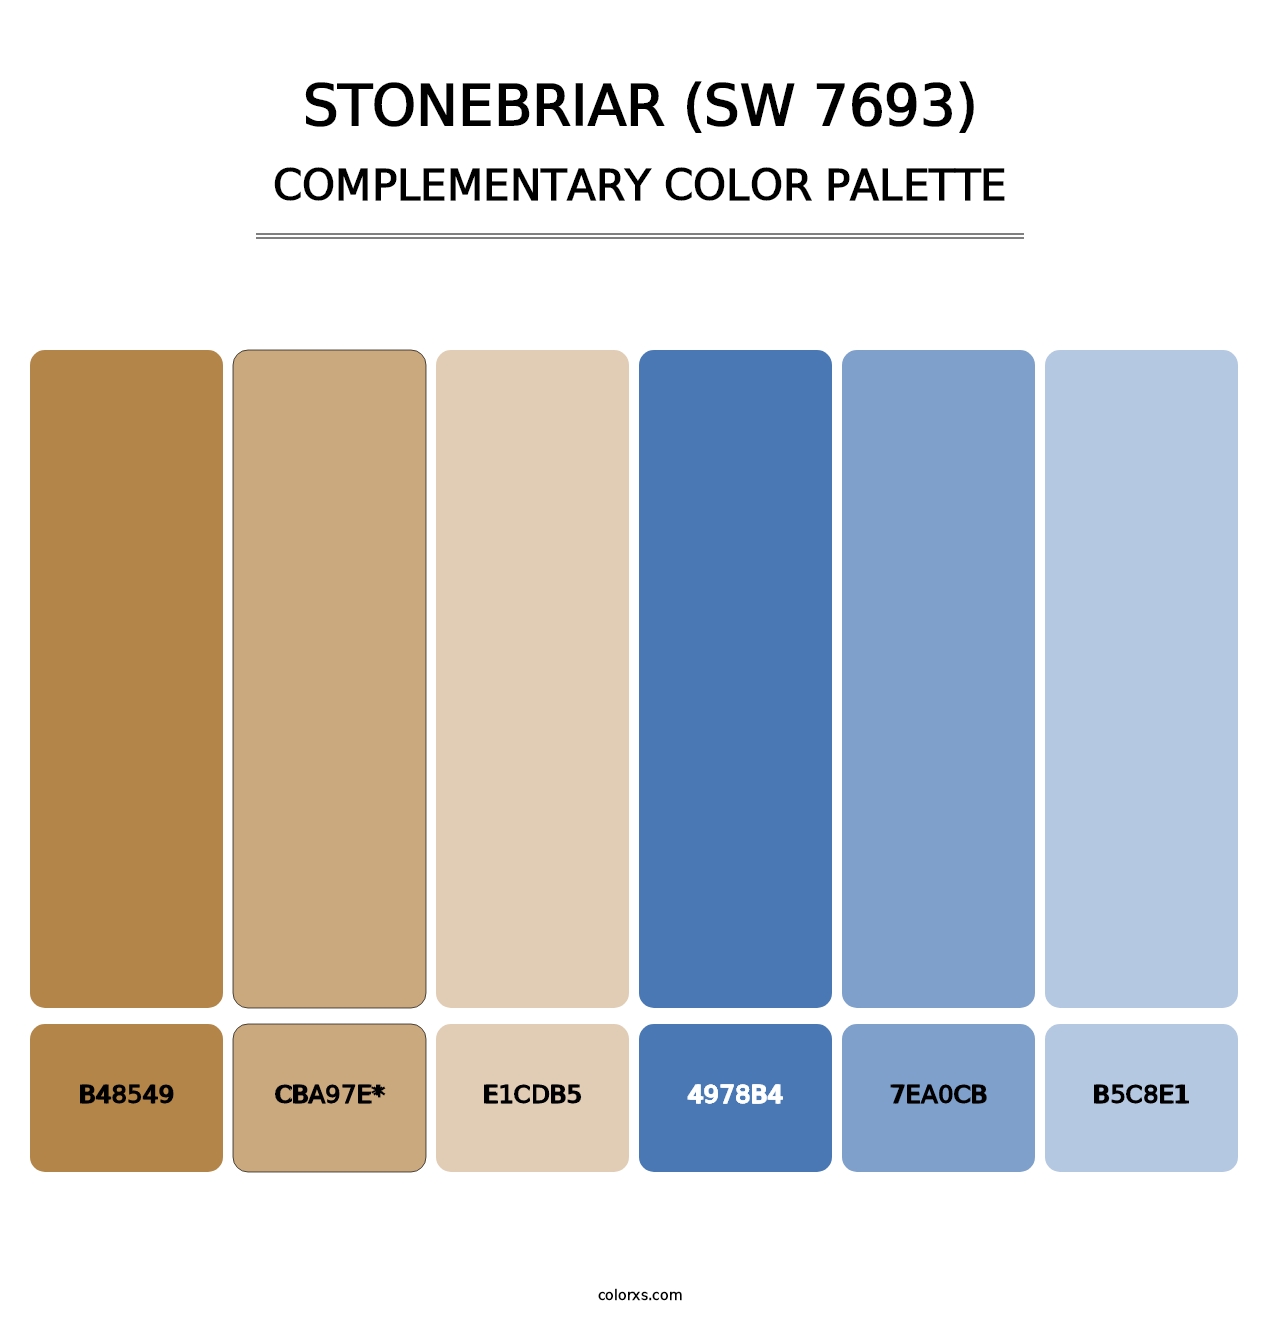 Stonebriar (SW 7693) - Complementary Color Palette